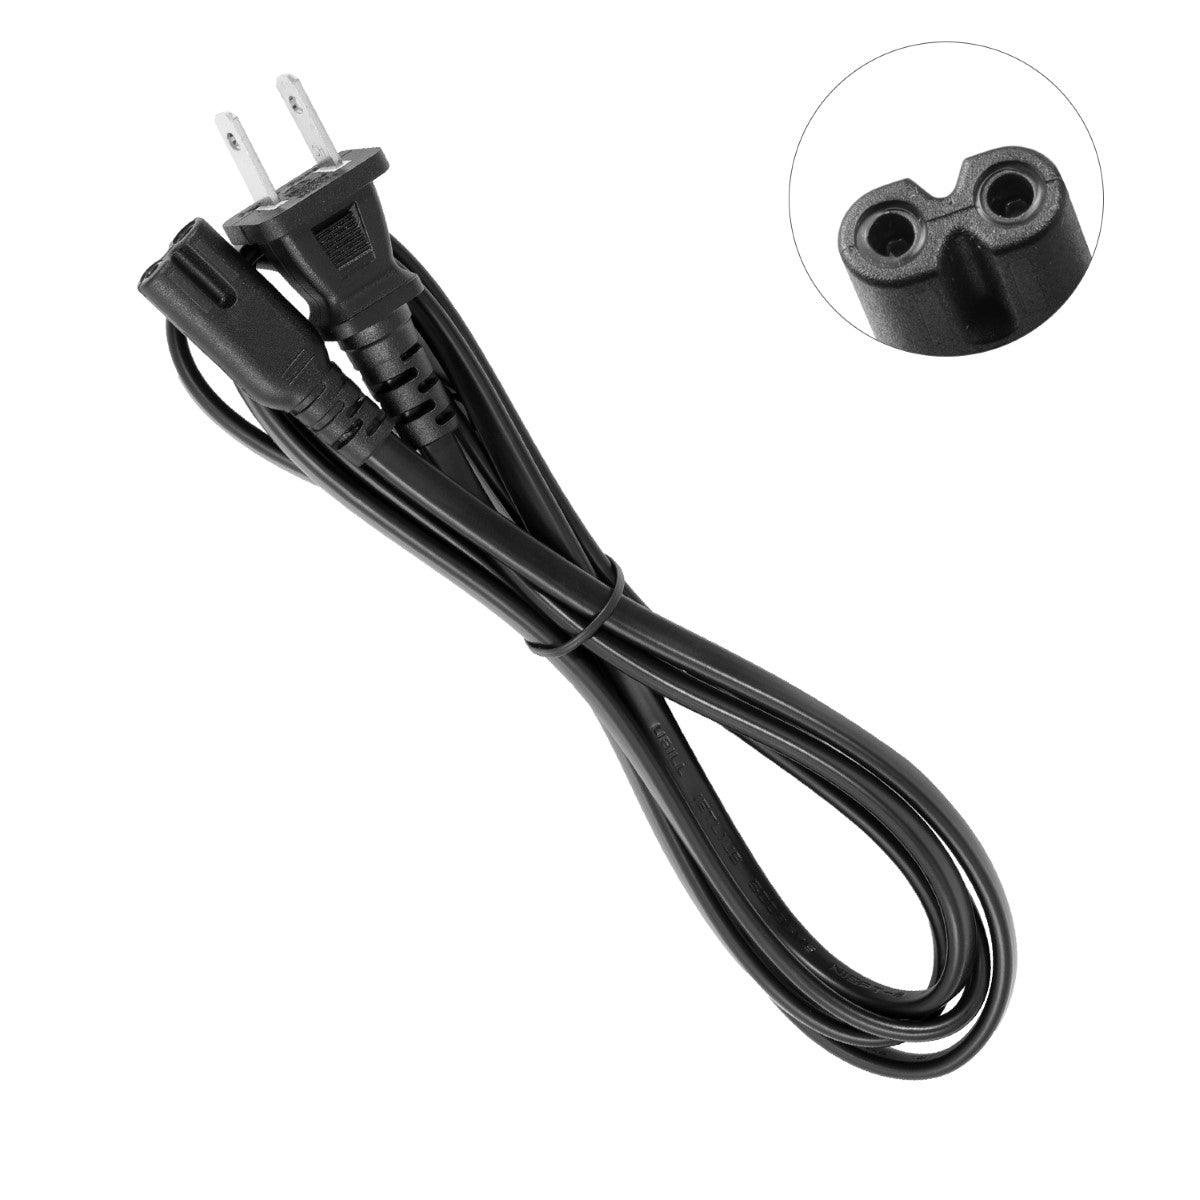 Power Cable  for HP Officejet 4650 Printer.